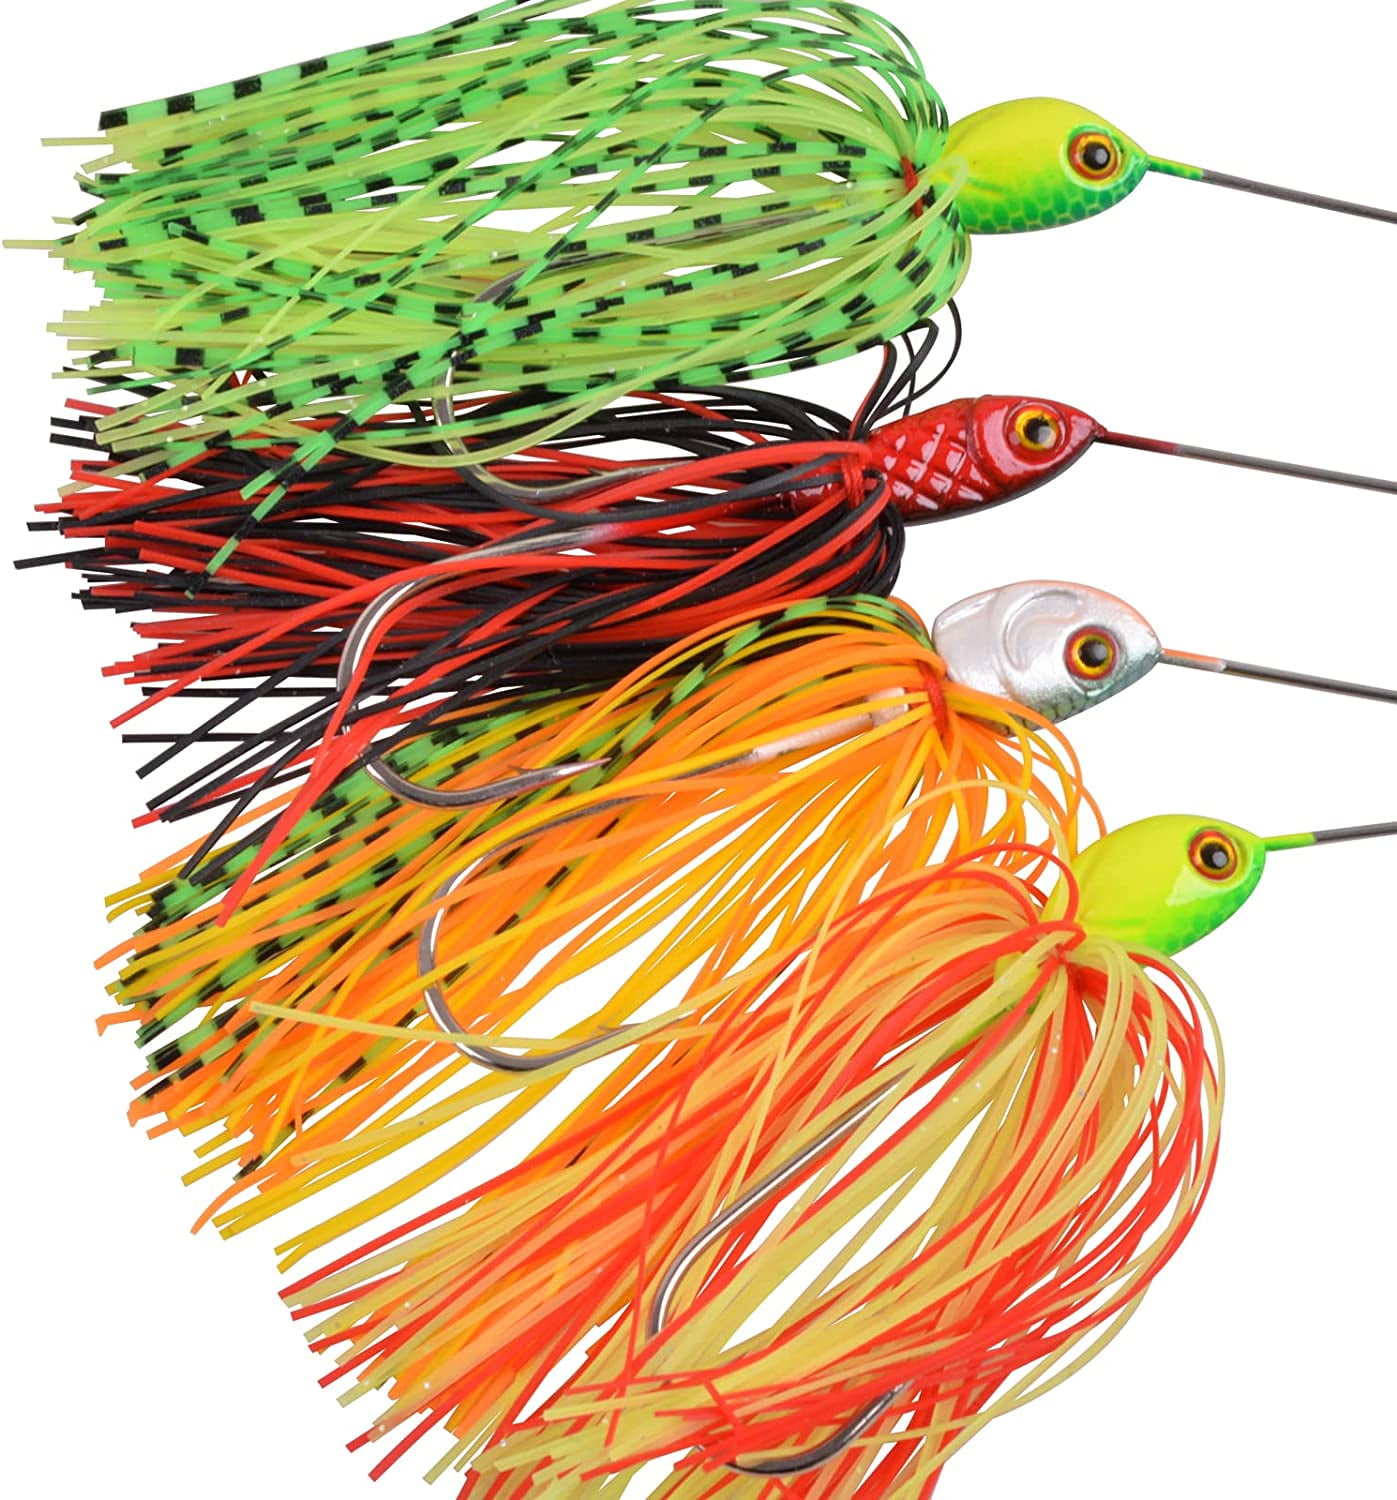  Buzzbait Fishing Lures Kit,Bass Fishing Spinner Baits with  Split Tail Trailer Spinnerbait Swim Jigs Lure for Pike Trout Salmon  Freshwater Saltwater Fishing : Sports & Outdoors